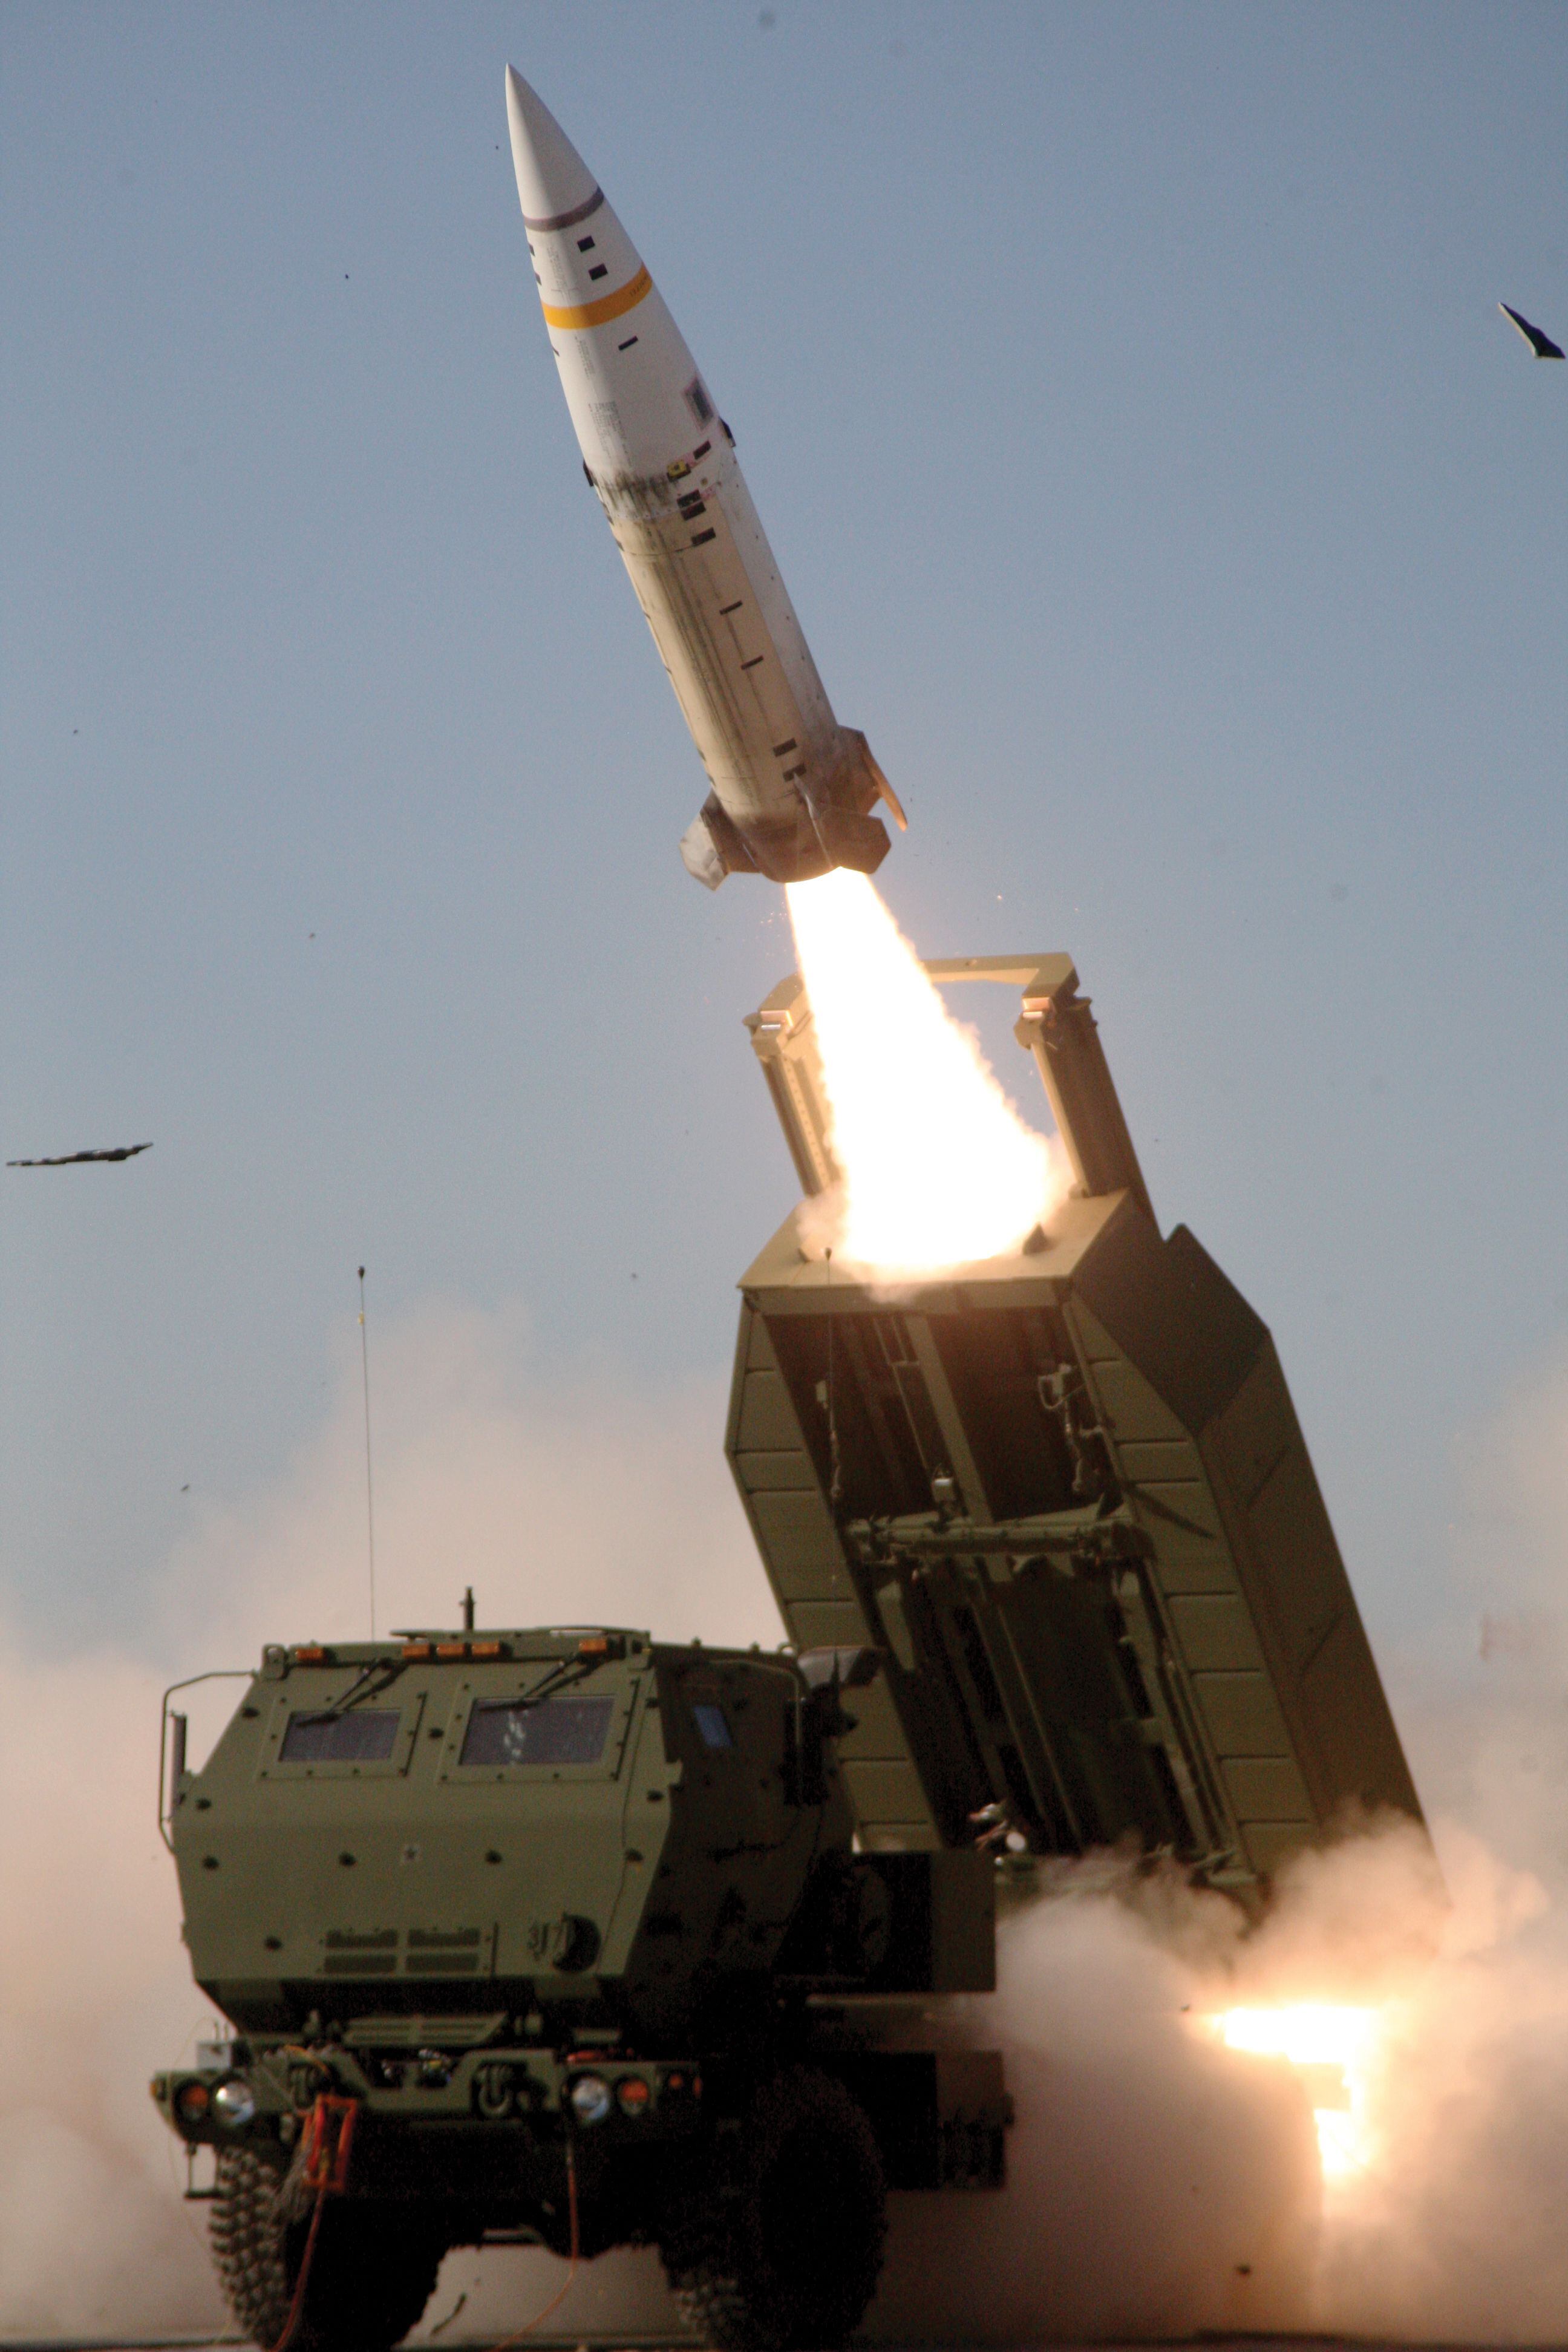 The United States' ATACMS missile is fired from a launcher of the M142 high mobility artillery rocket system.  (U.S. Army photo).